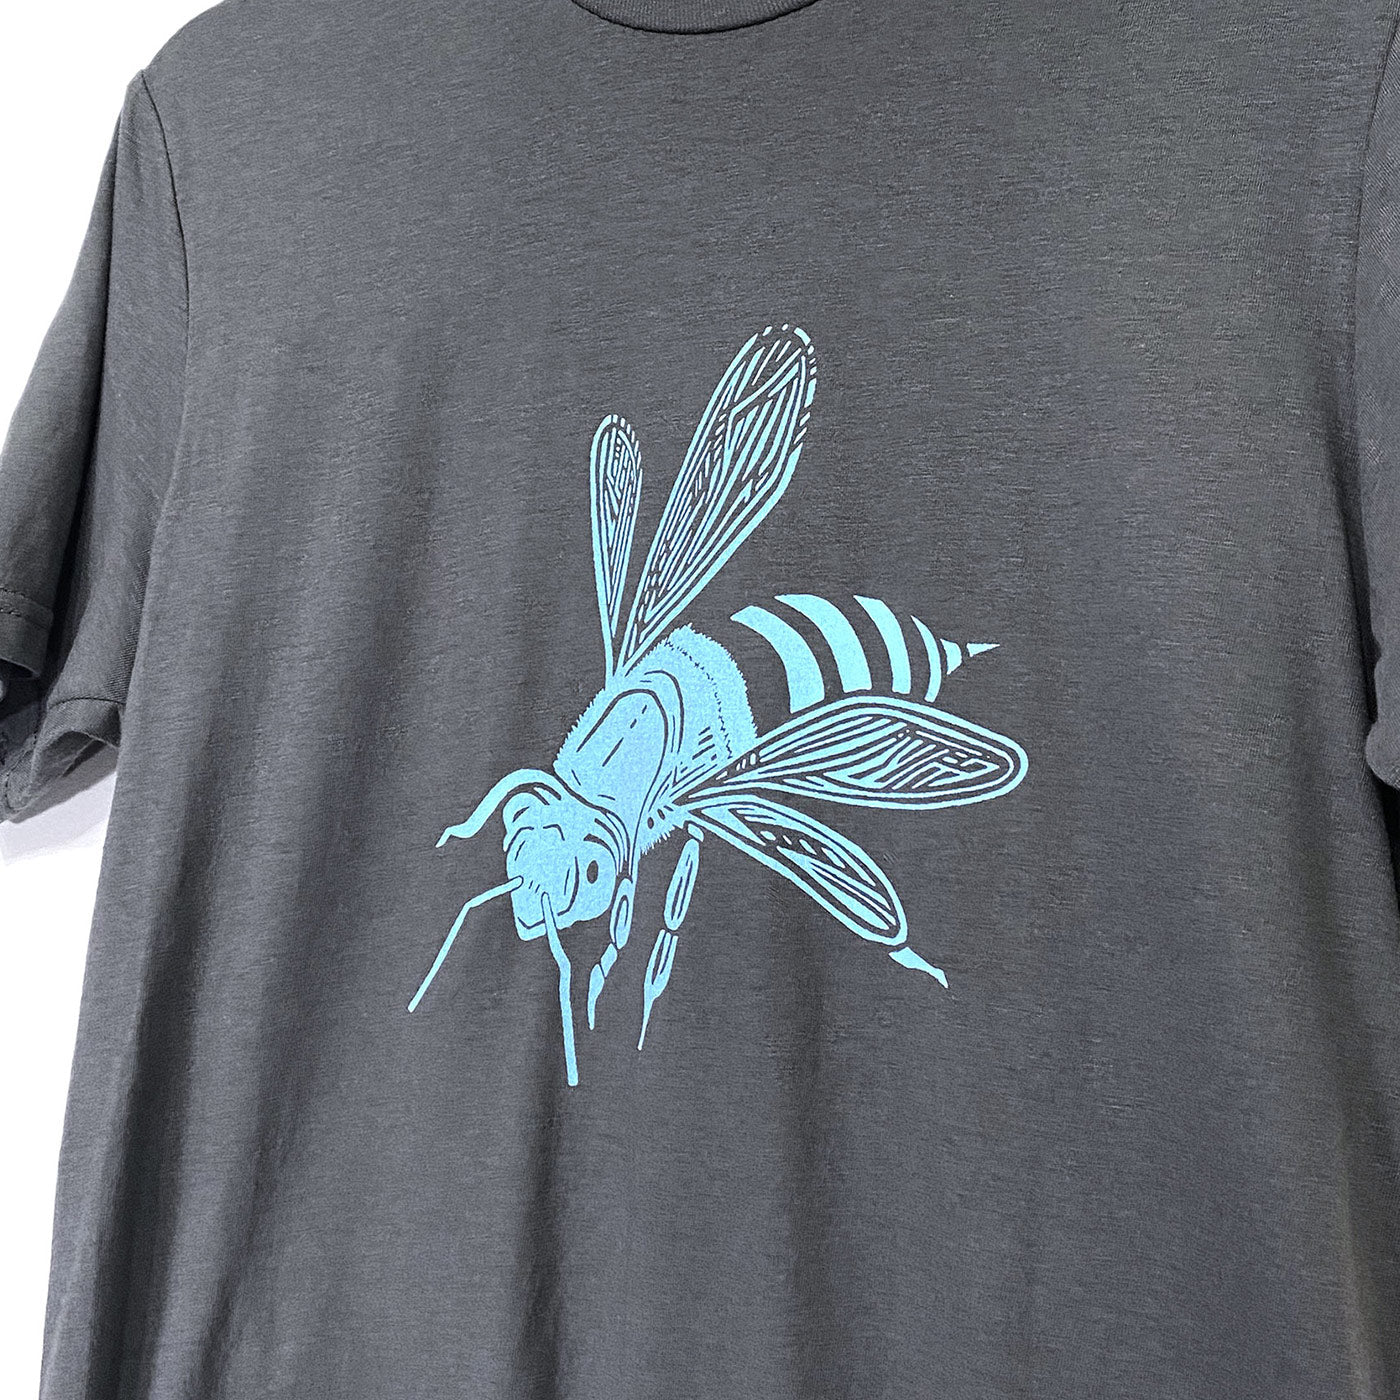 Close up of grey t-shirt with an illustration of a bee in light blue printed on the front